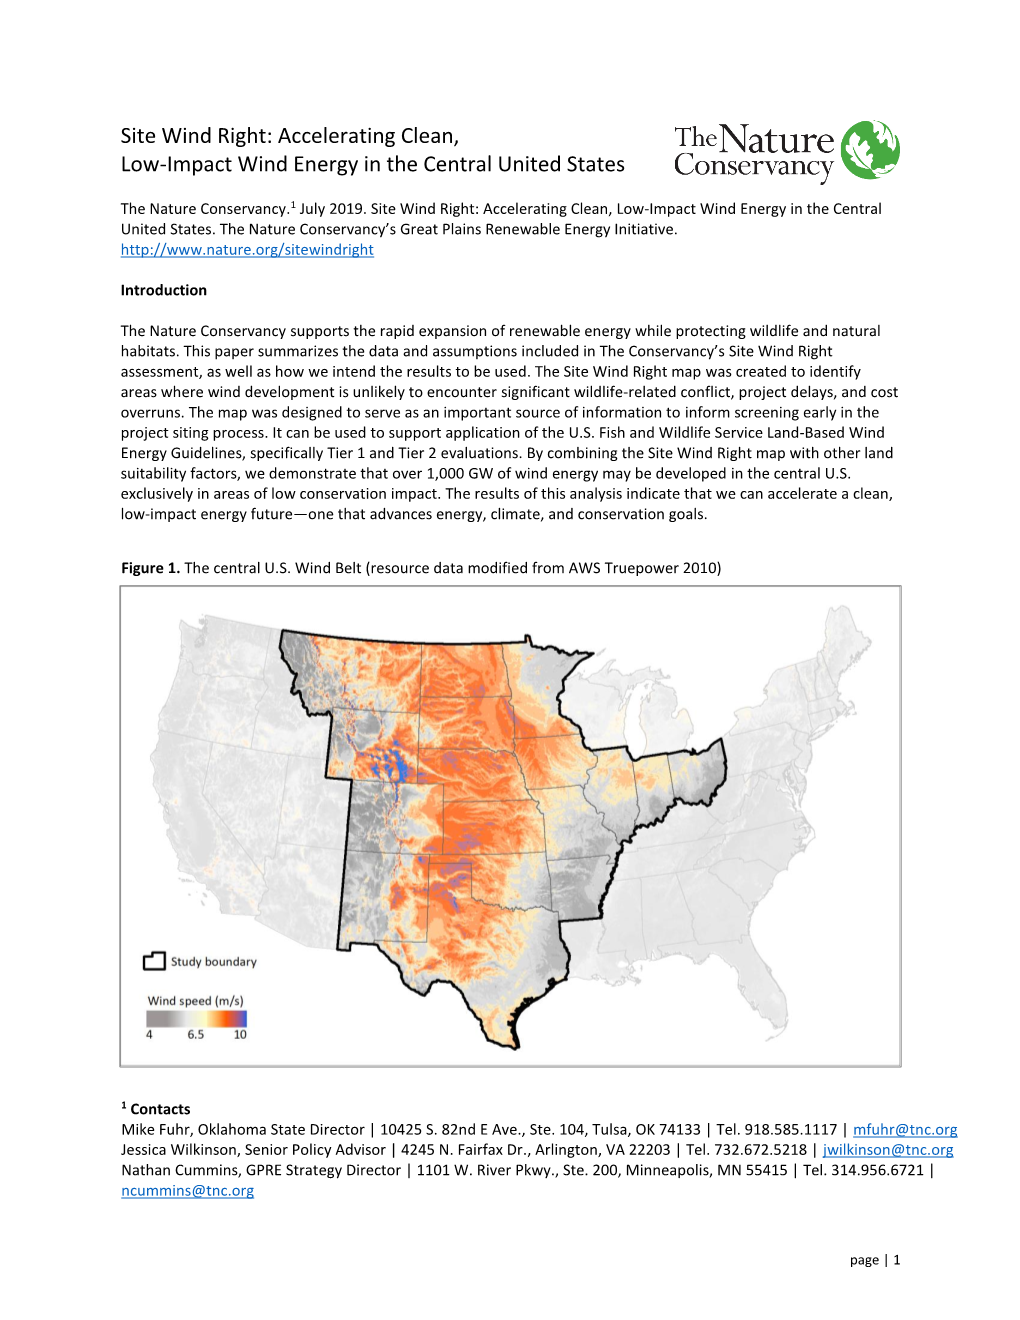 Accelerating Clean, Low-Impact Wind Energy in the Central United States